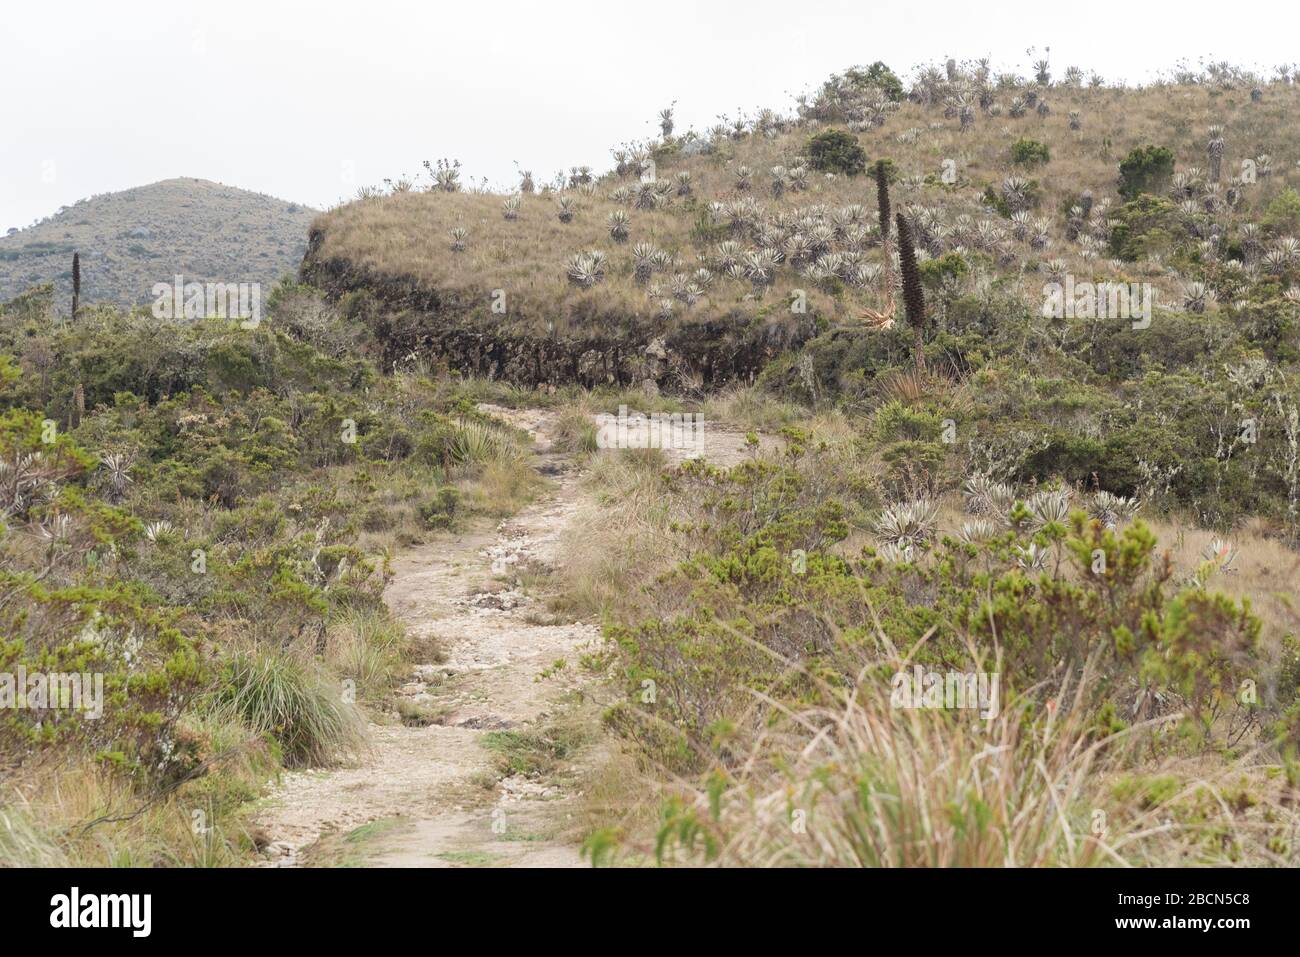 Chingaza National Natural Park, Colombia. Paramo, footpath through a moorland landscape, with native vegetation on its edges and hills on the horizon Stock Photo